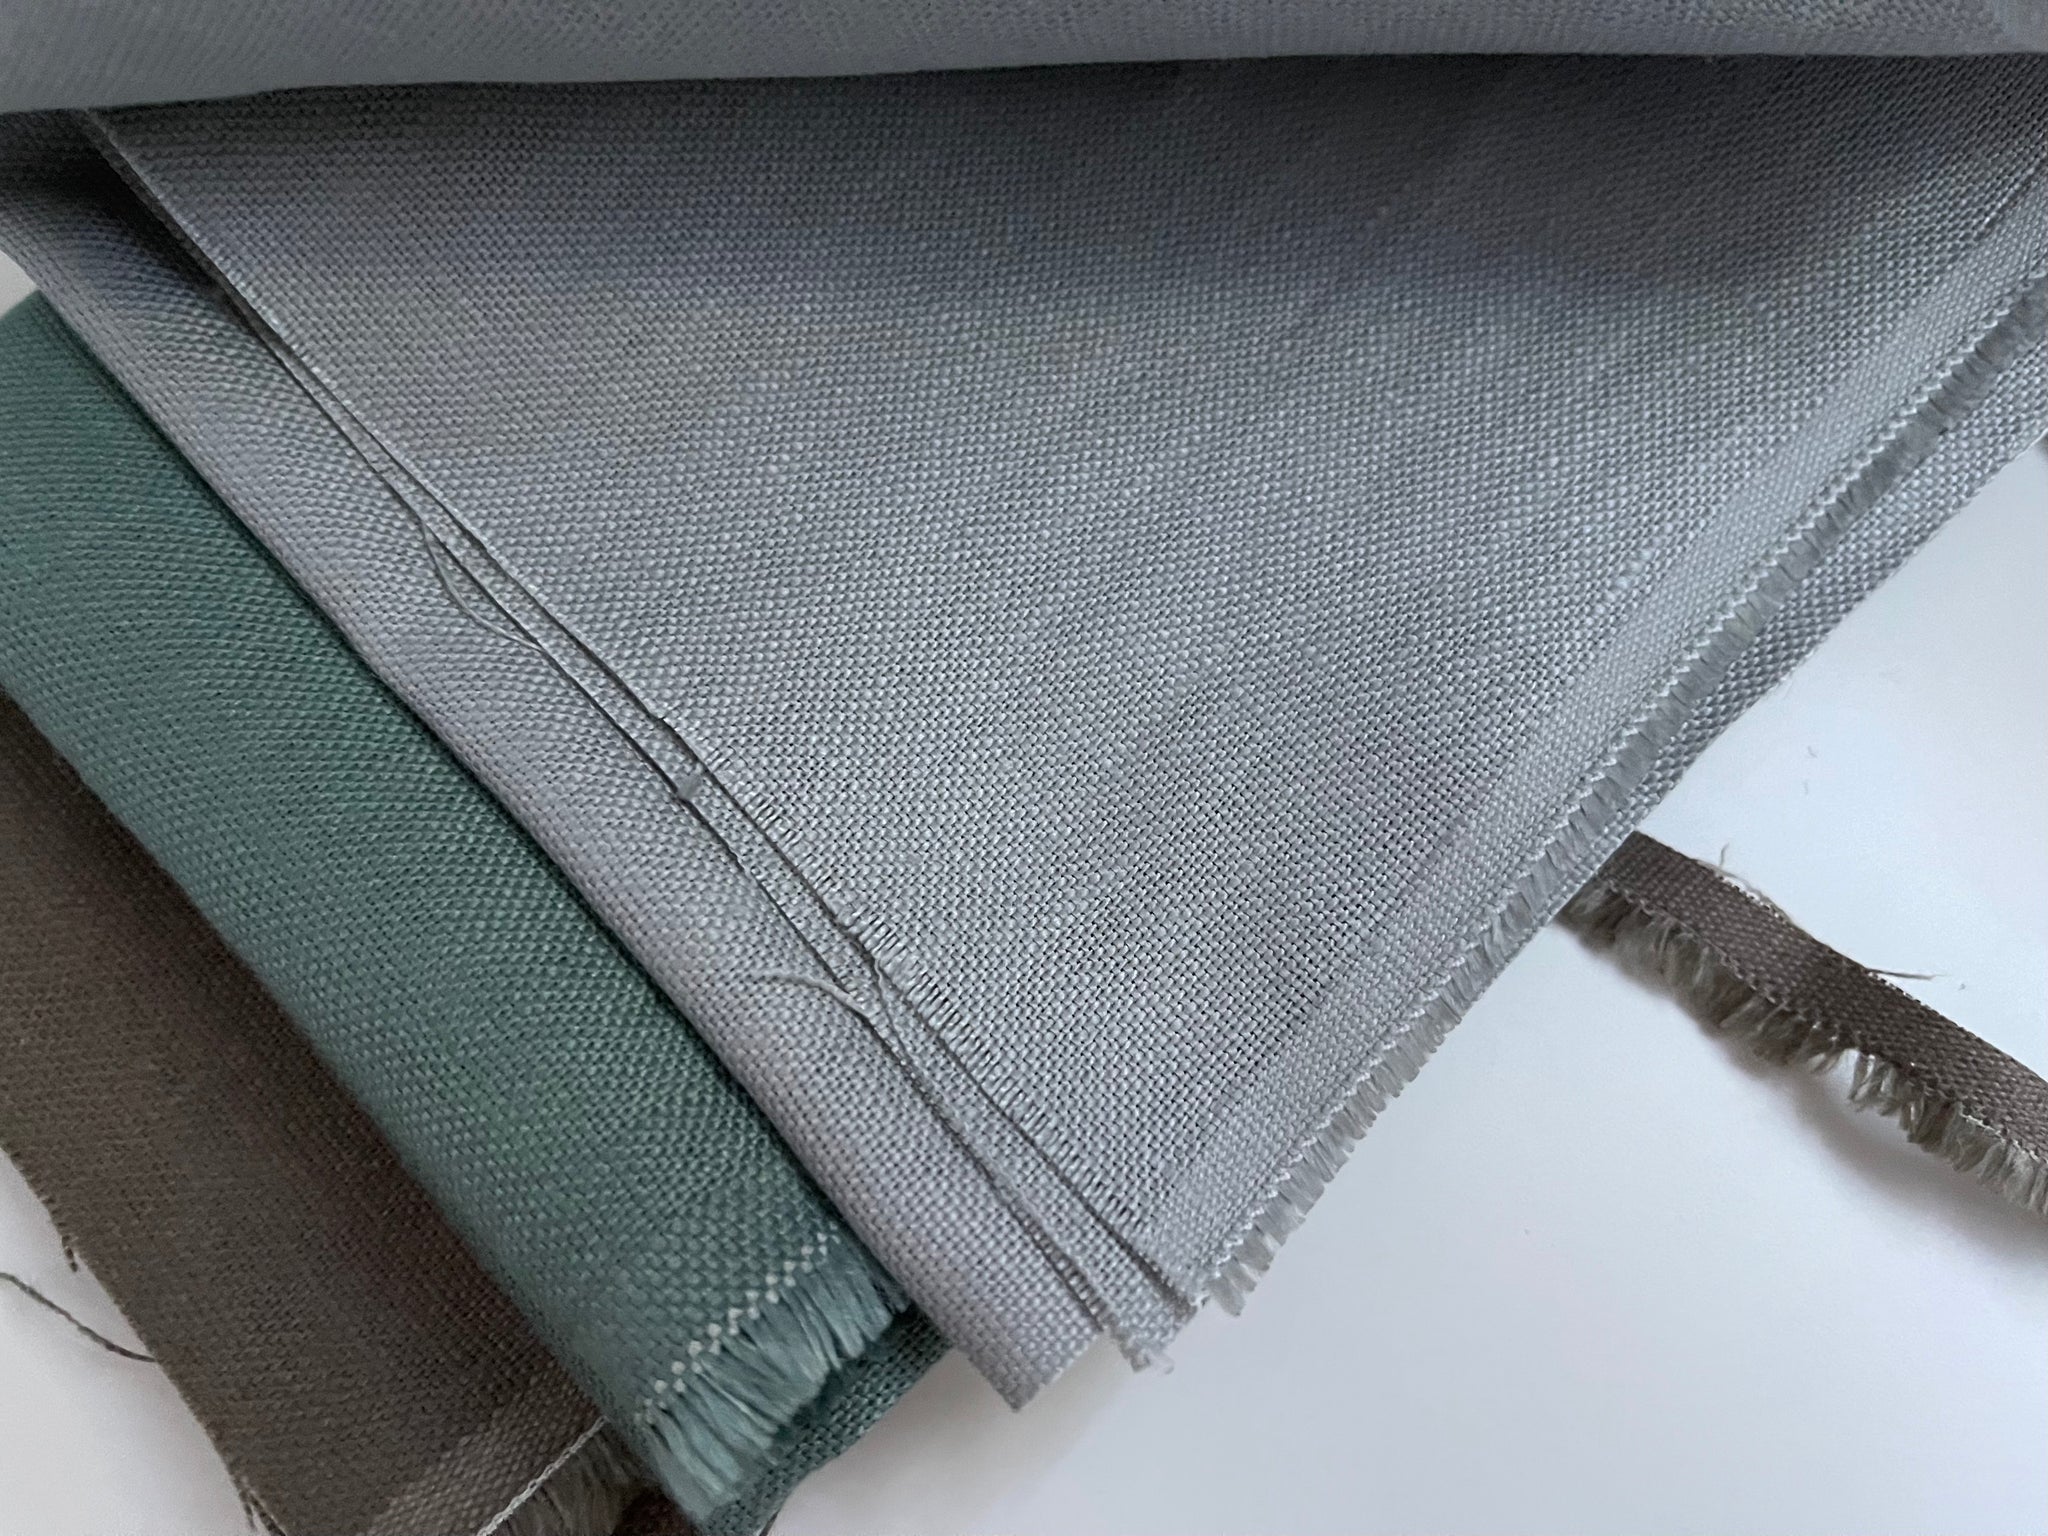 Linen Fabric Remnants - Brown, Green, Gray - Heavy Weight